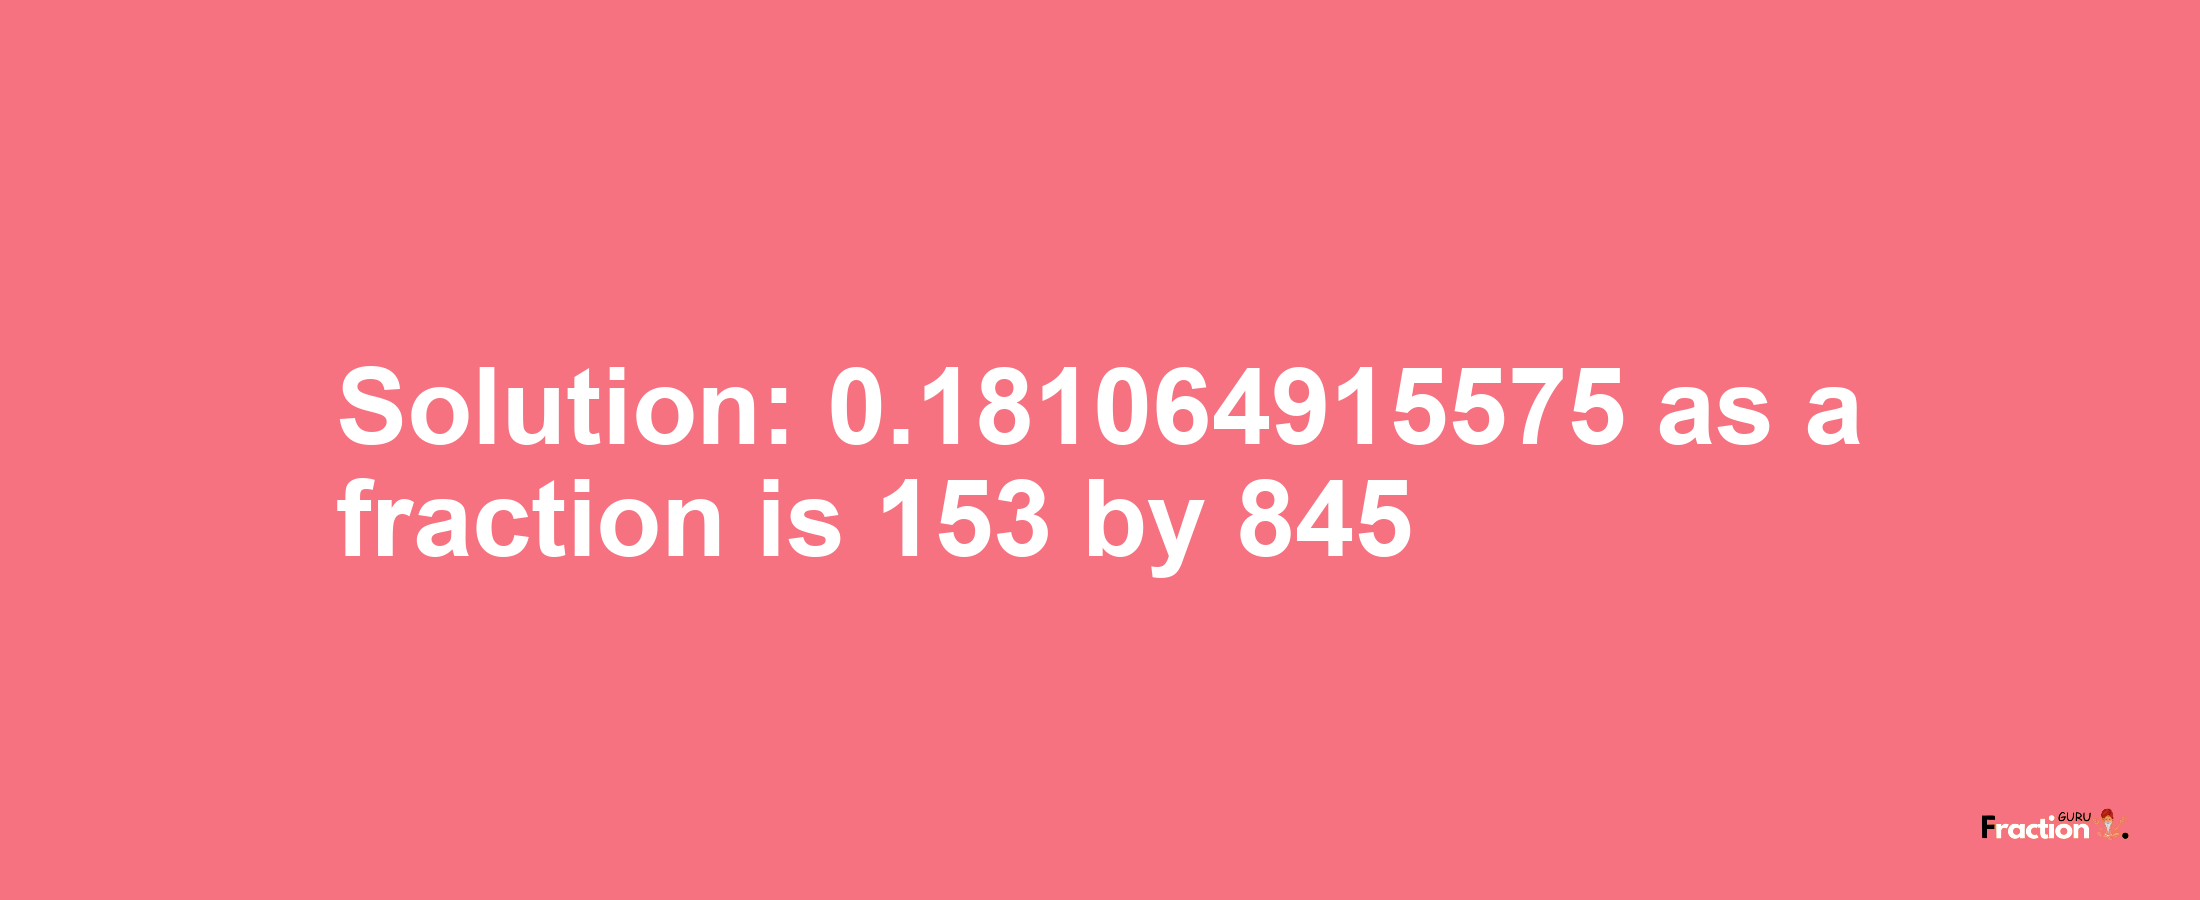 Solution:0.181064915575 as a fraction is 153/845